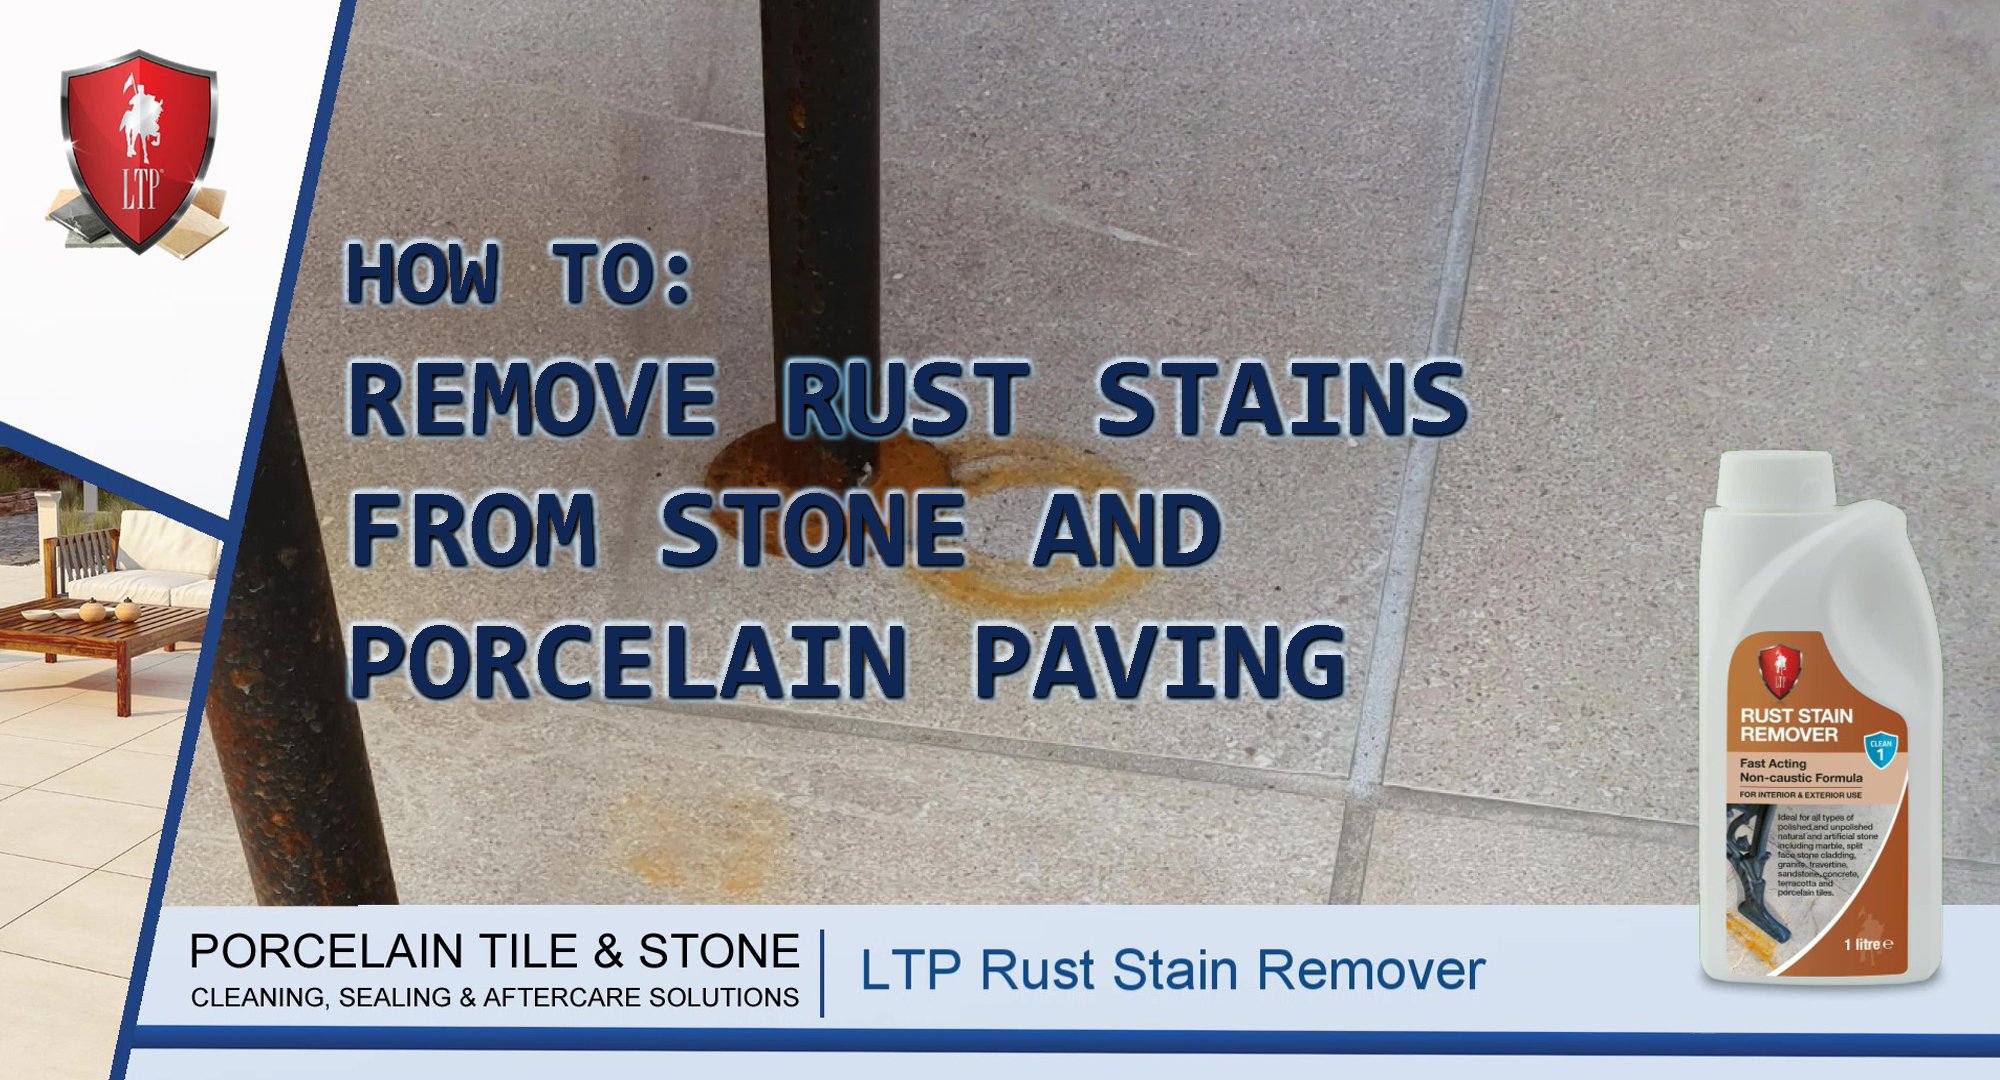 26a LTP_Rust Stain Remover_Natural Stone & Porcelain Paving_2022_thumbnail.jpg